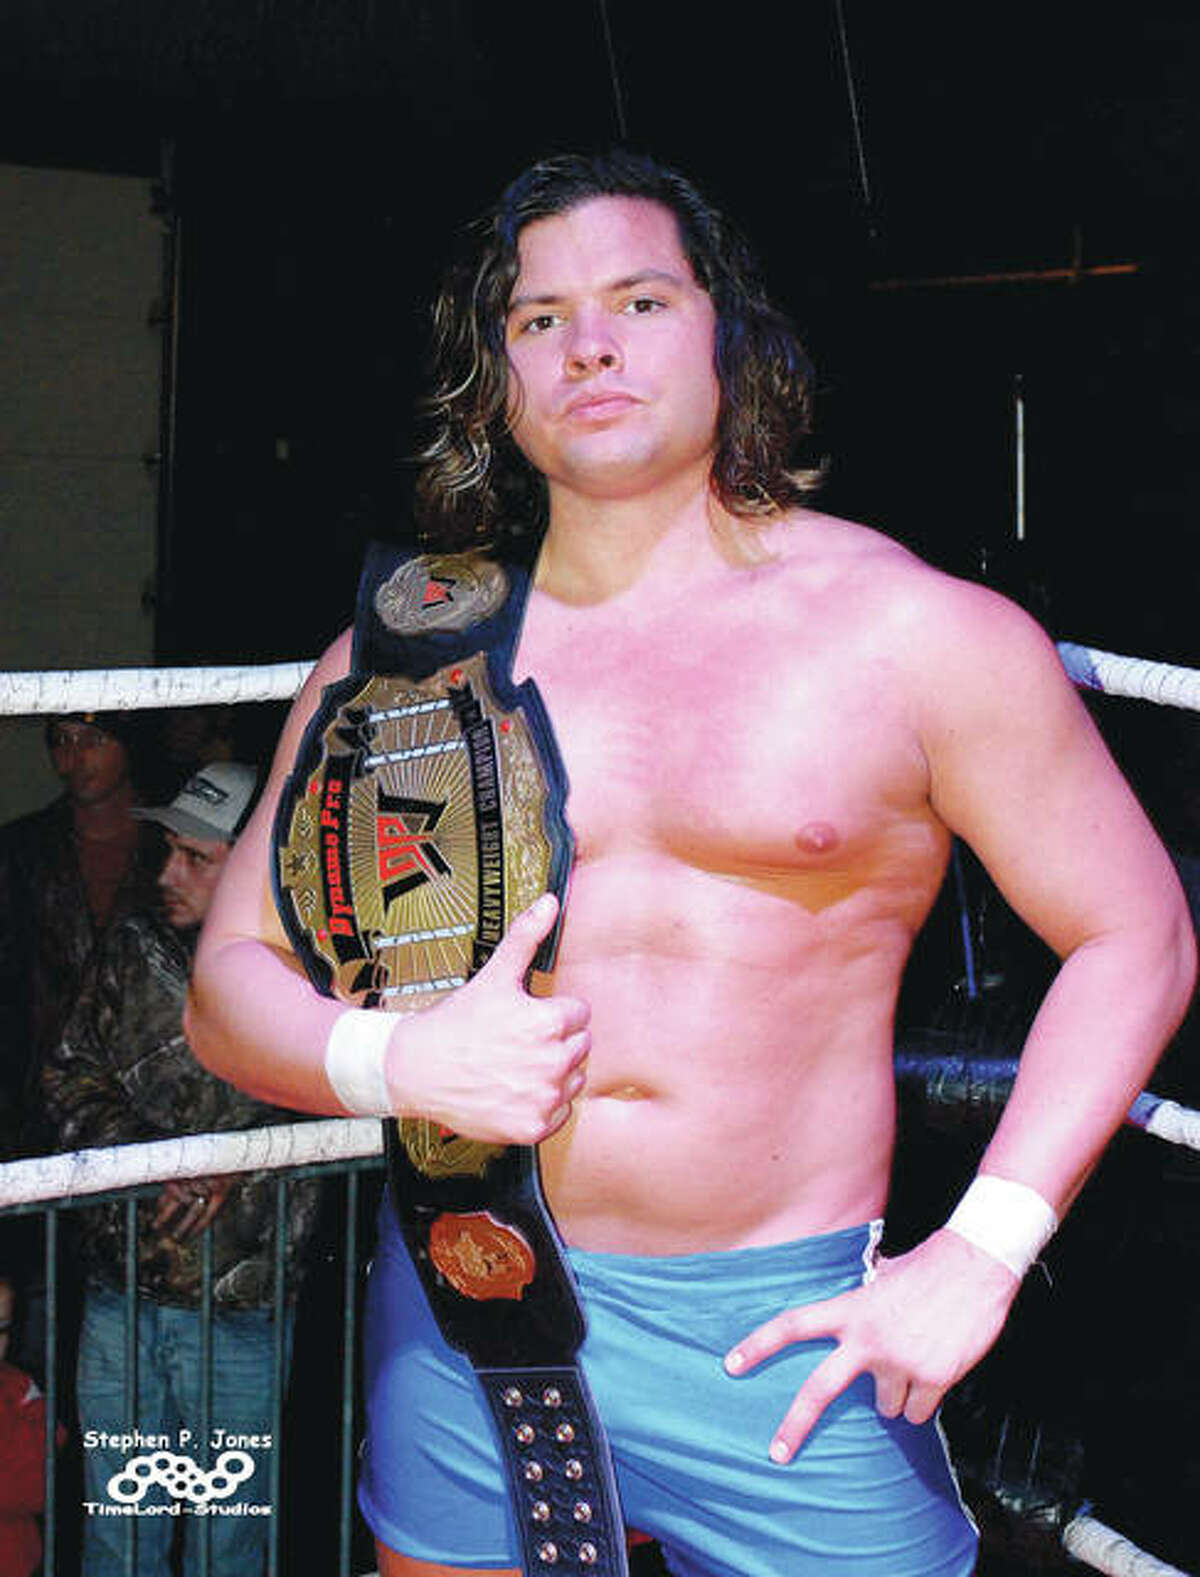 Riot on the River’s third of three events in its series determines who will take home the series’ custom-made commissioned championship belt. Dynamo Pro Wrestling heavyweight champion Brandon Aarons, pictured with his heavyweight championship belt, faces challenger “Lights Out” Adrian Surge, in a quest to win the Riot on the River top title Friday, Aug. 4, from Dynamo Pro Wrestling.